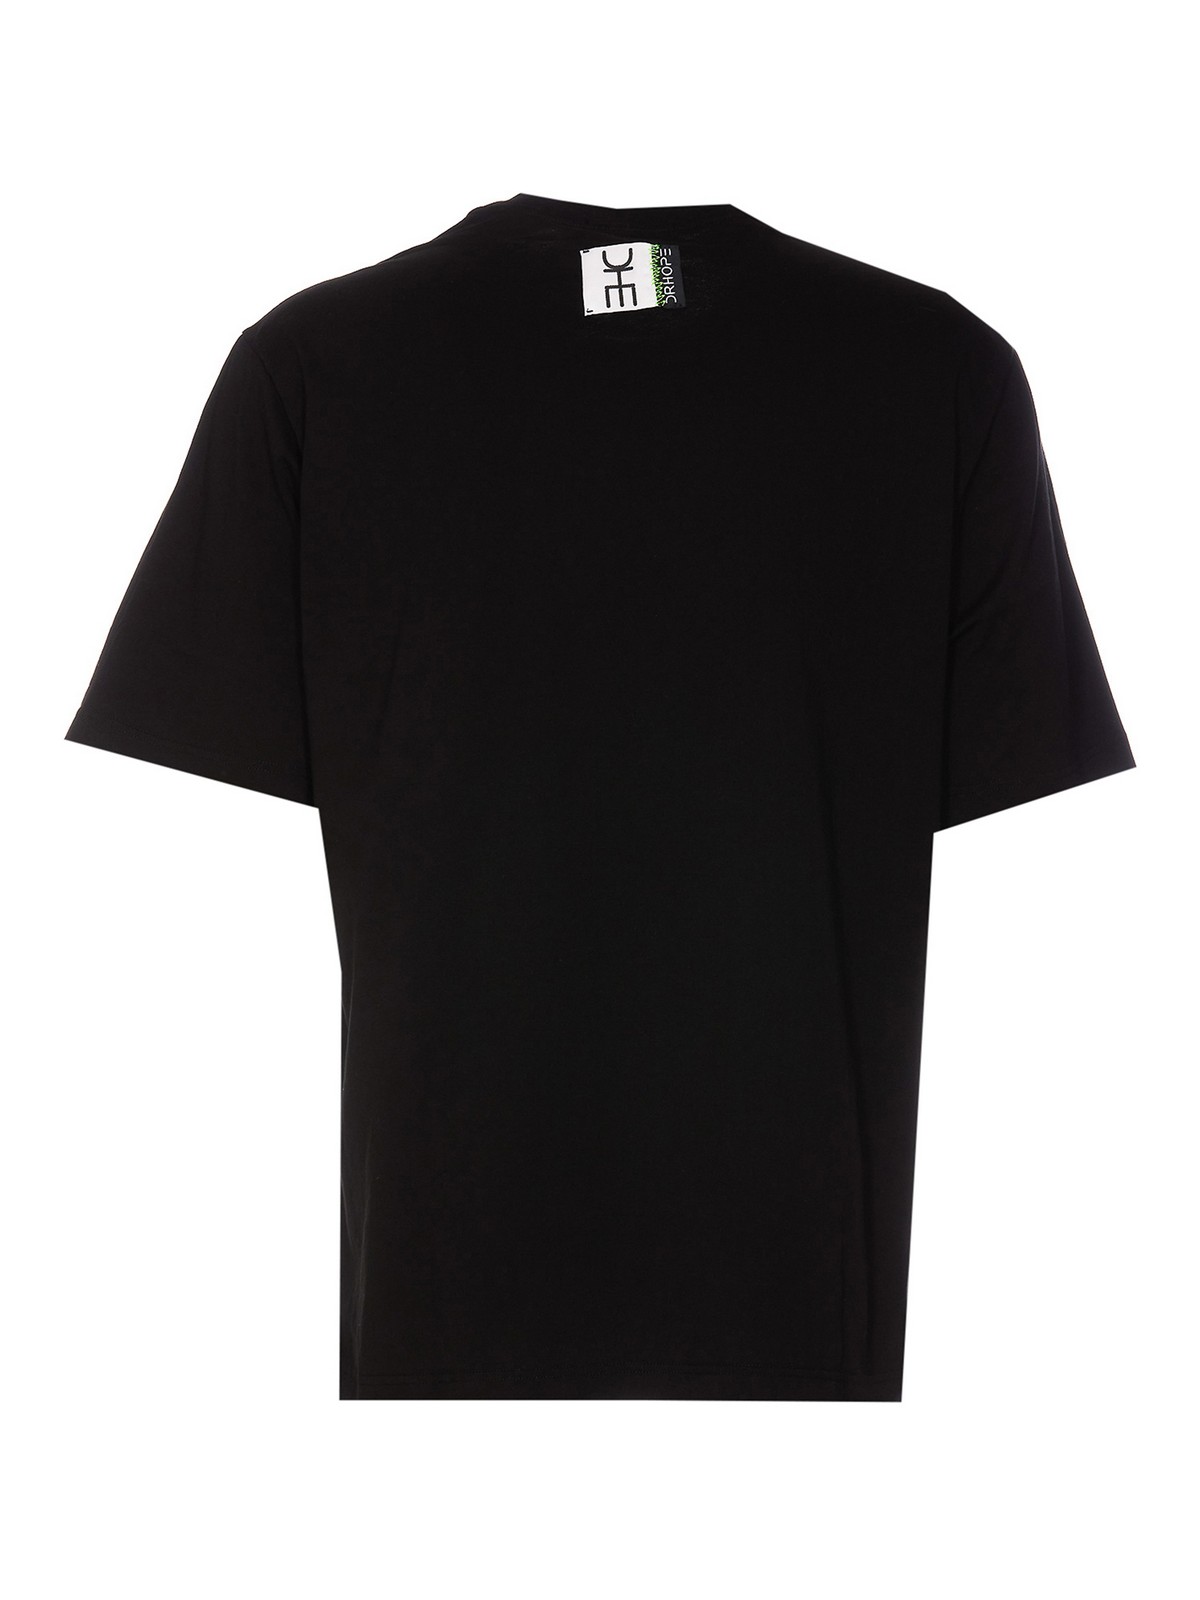 Shop Drhope Graphic Print T-shirt In Black